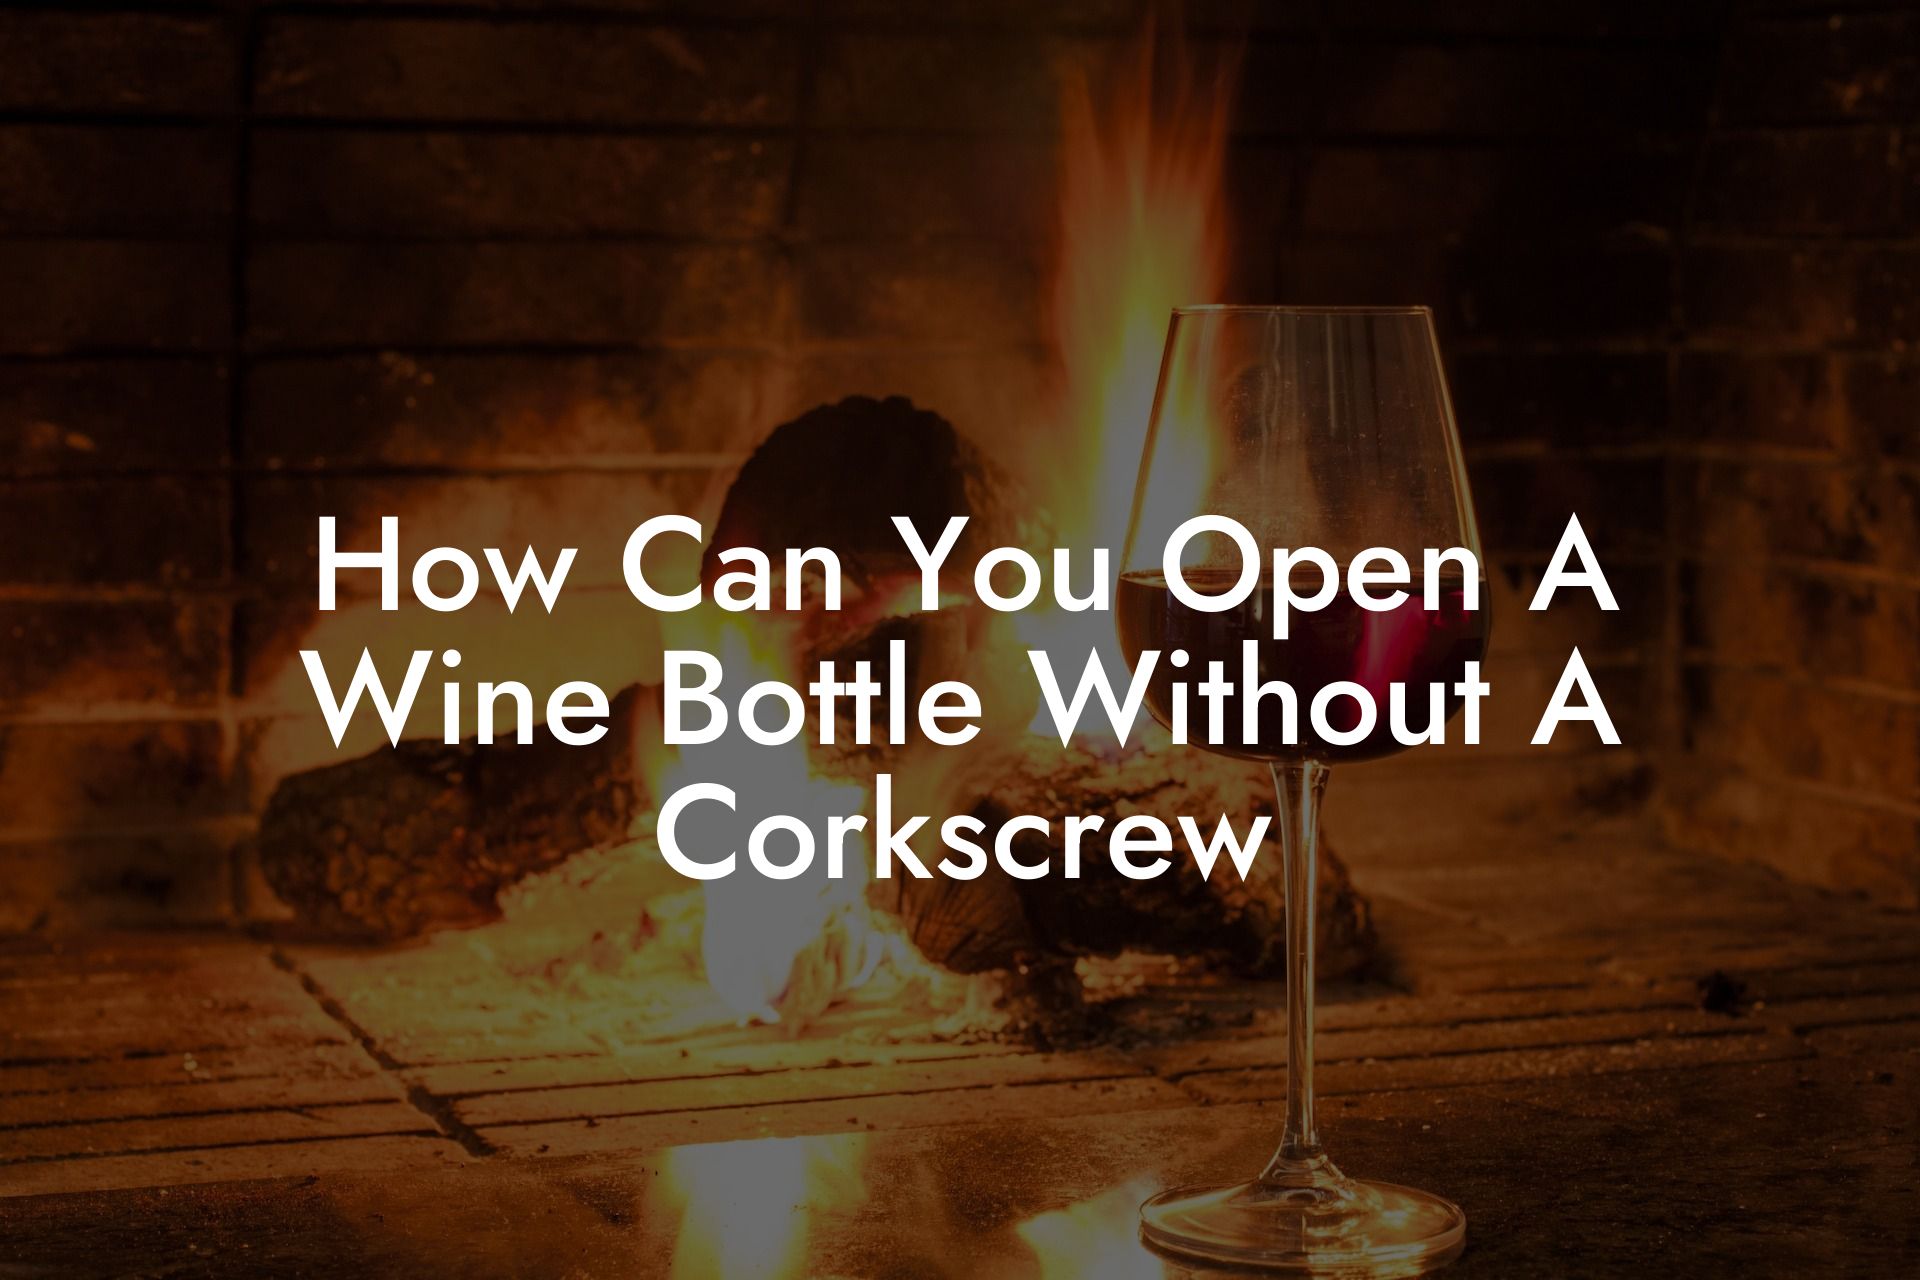 How Can You Open A Wine Bottle Without A Corkscrew